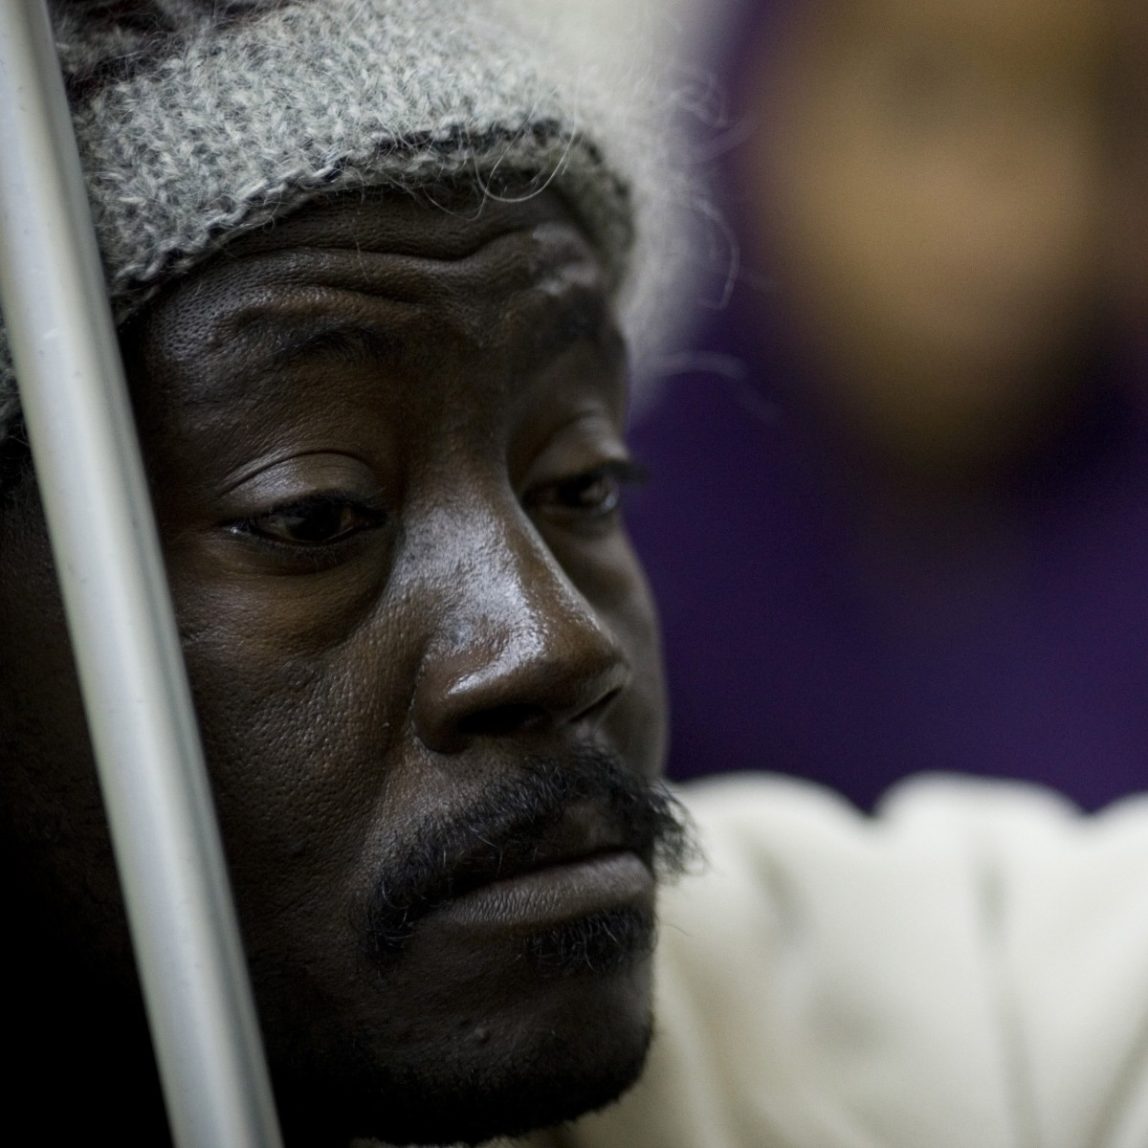 An African migrant worker waits for free medical treatment at the Physicians for Human Rights clinic in Jaffa, a mixed Arab Jewish neighborhood of Tel Aviv, Israel, Wednesday, Feb. 23, 2011. (AP Photo/Ariel Schalit)